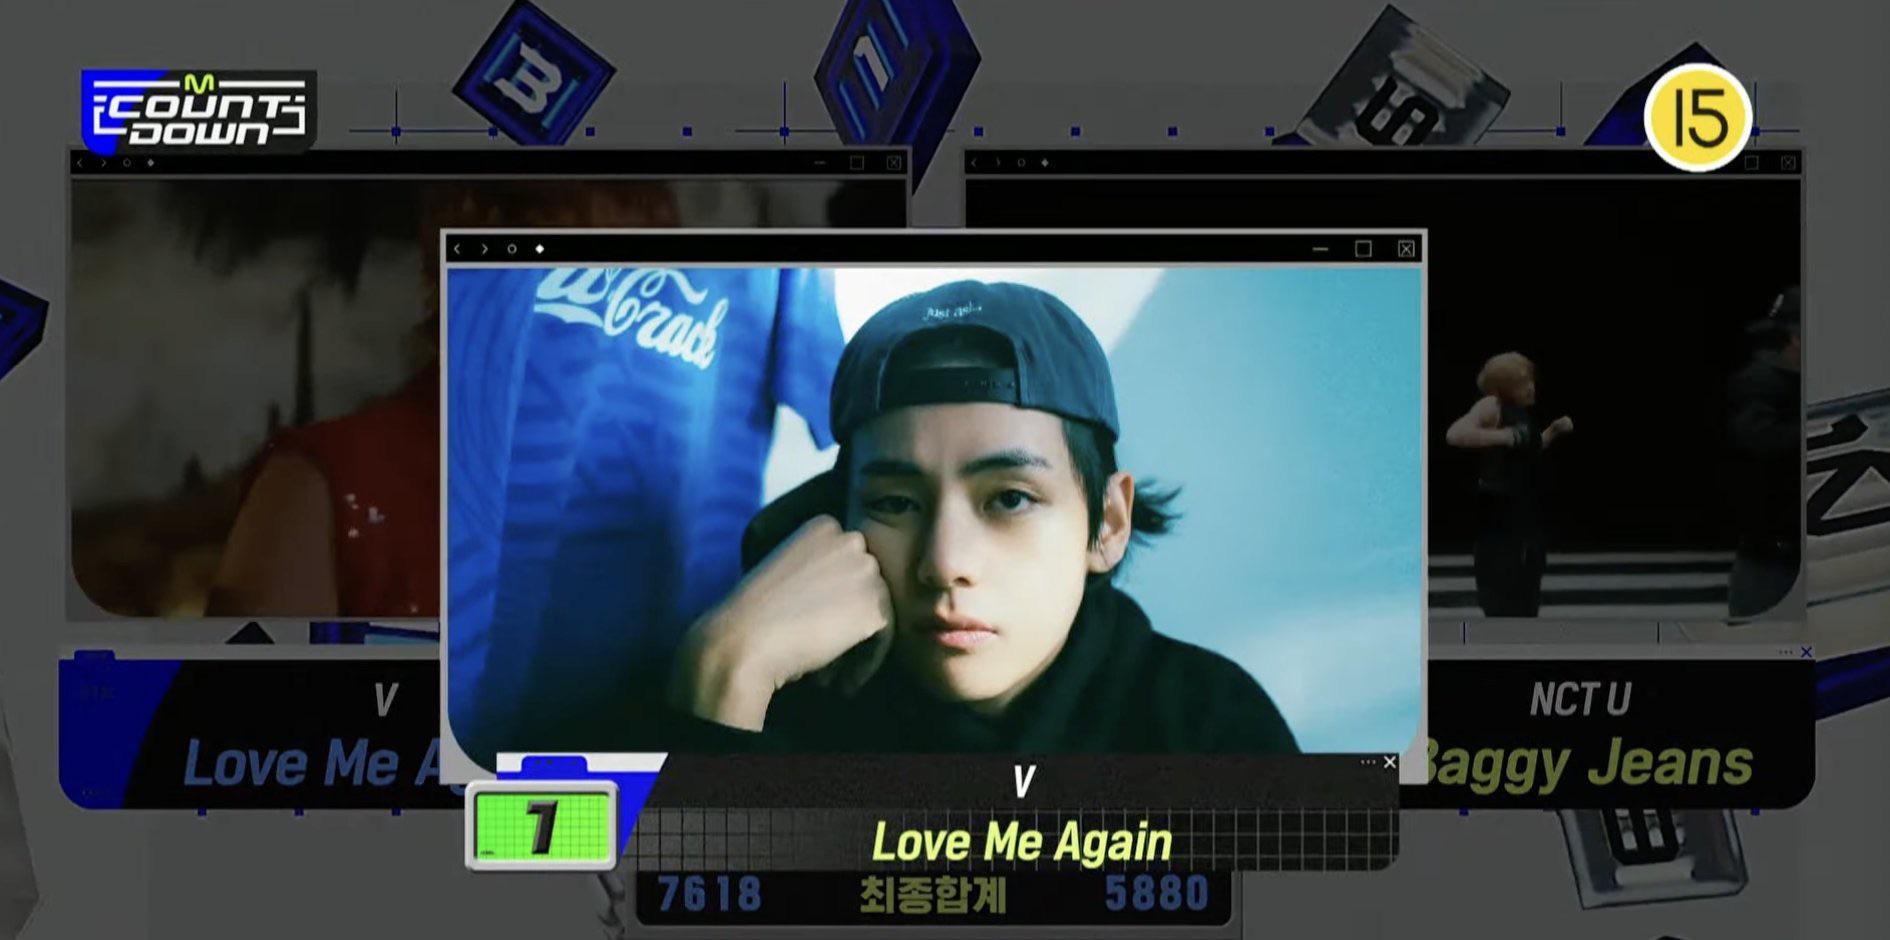 230907 V has taken his 3rd win for “Love Me Again” and earned a Triple Crown on M Countdown!